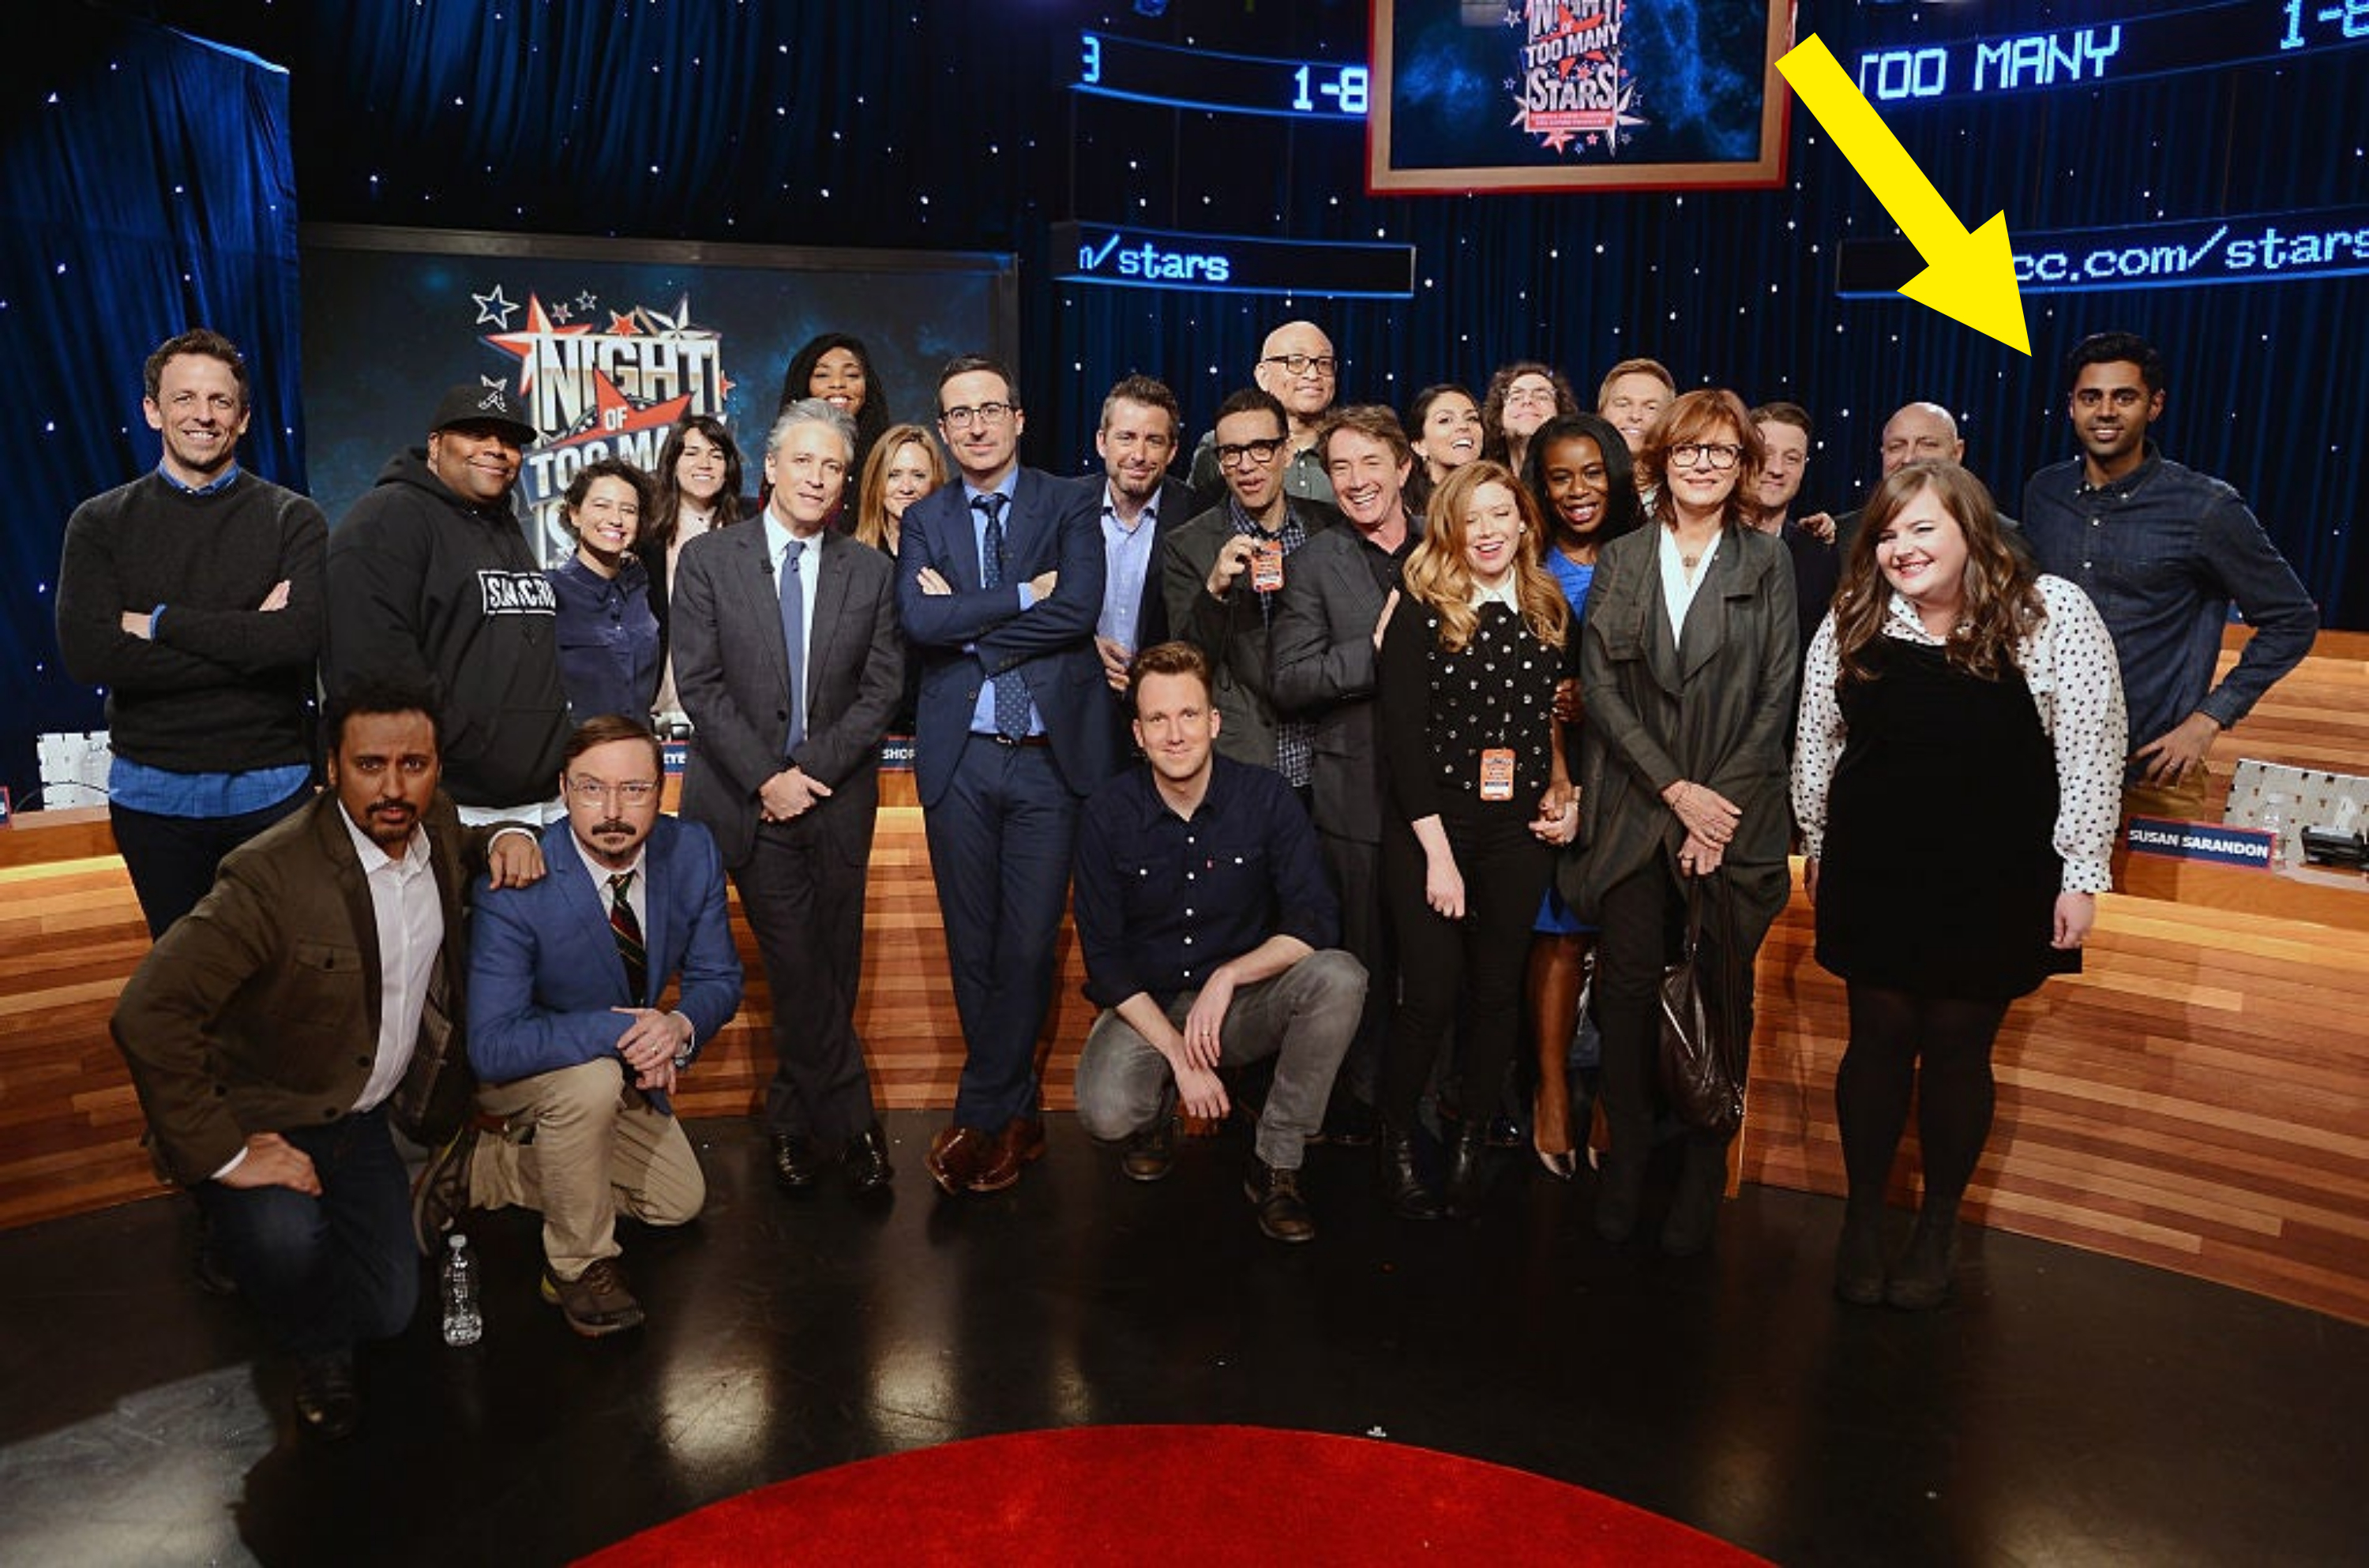 Hasan takes a group photo with the cast and crew of The Daily Show